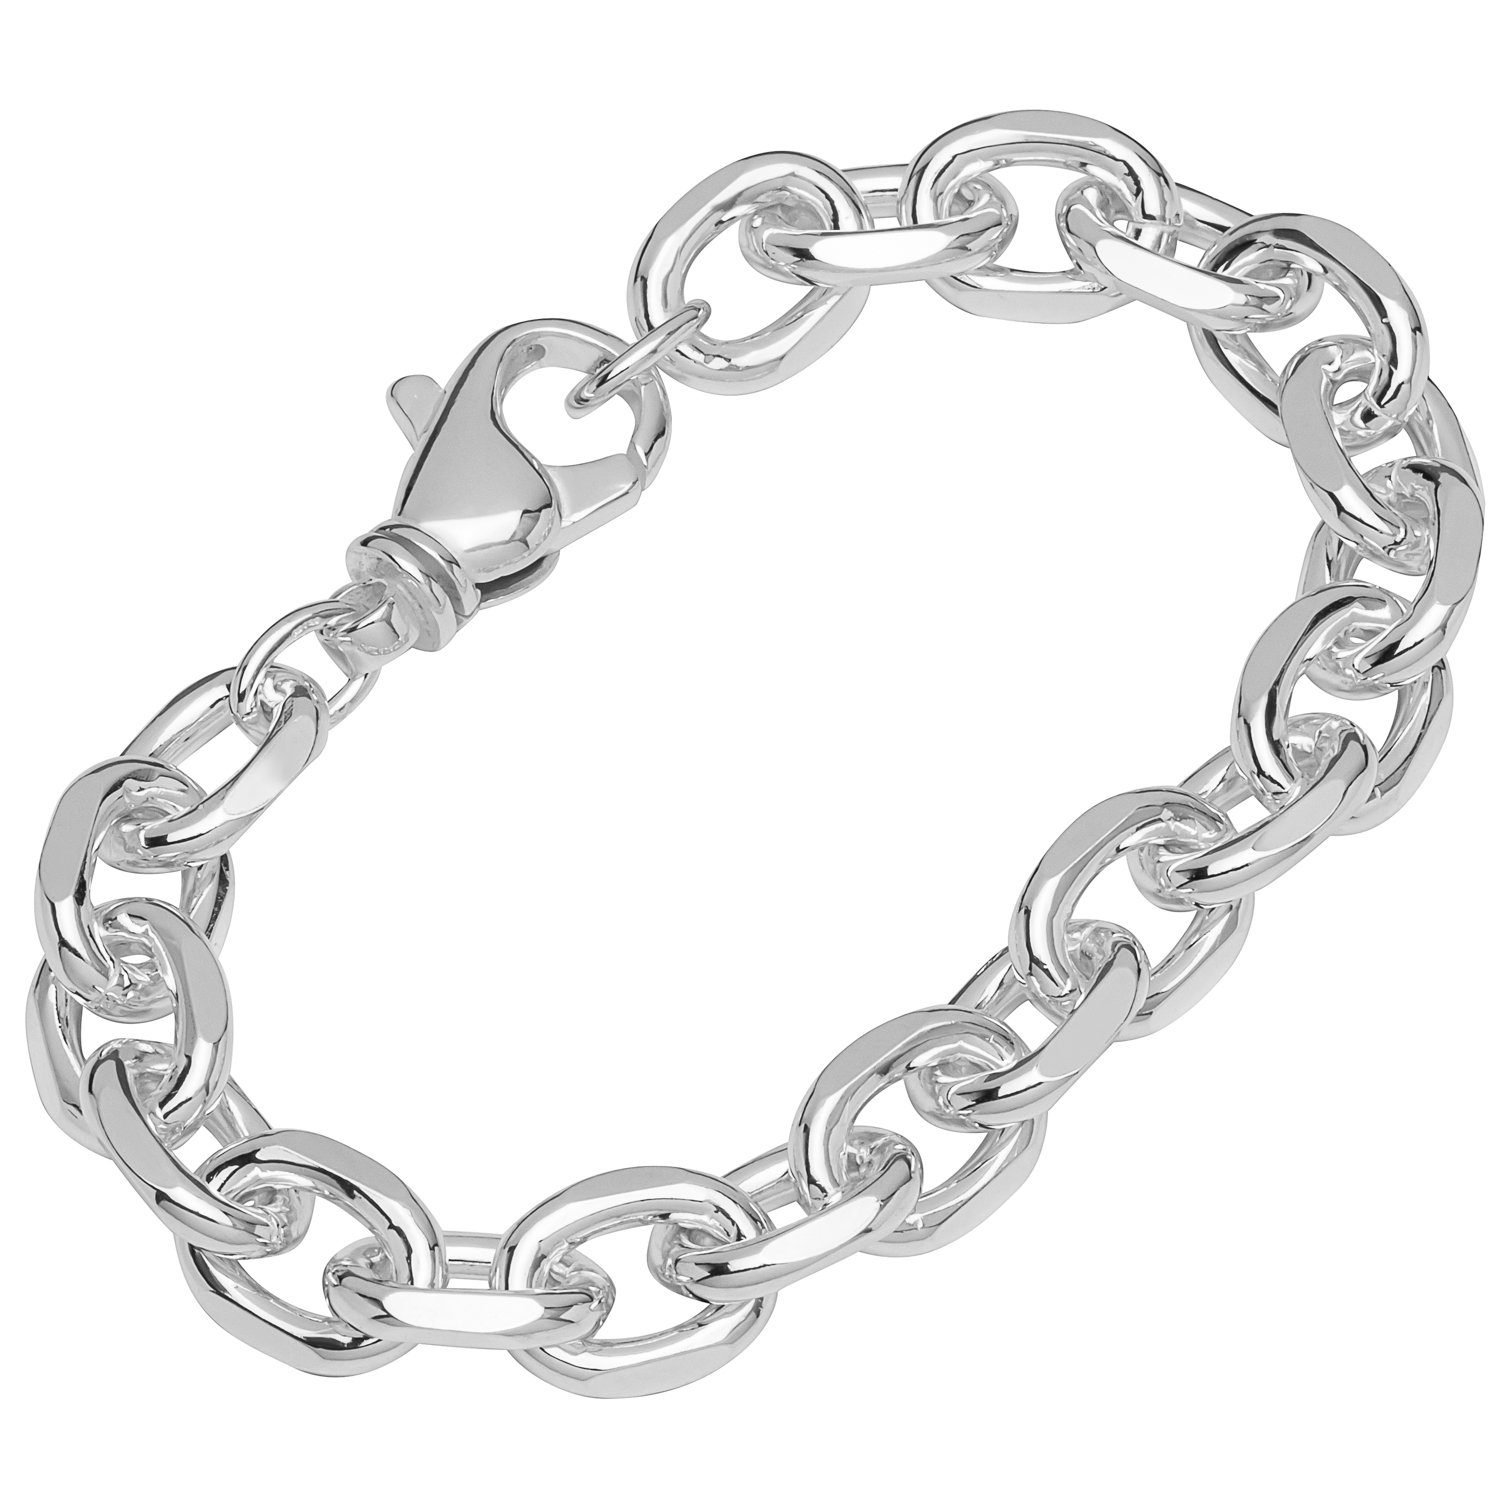 NKlaus Silberarmband Armband 925 Sterling Silber 19cm Ankerkette 4 fach (1 Stück), Made in Germany